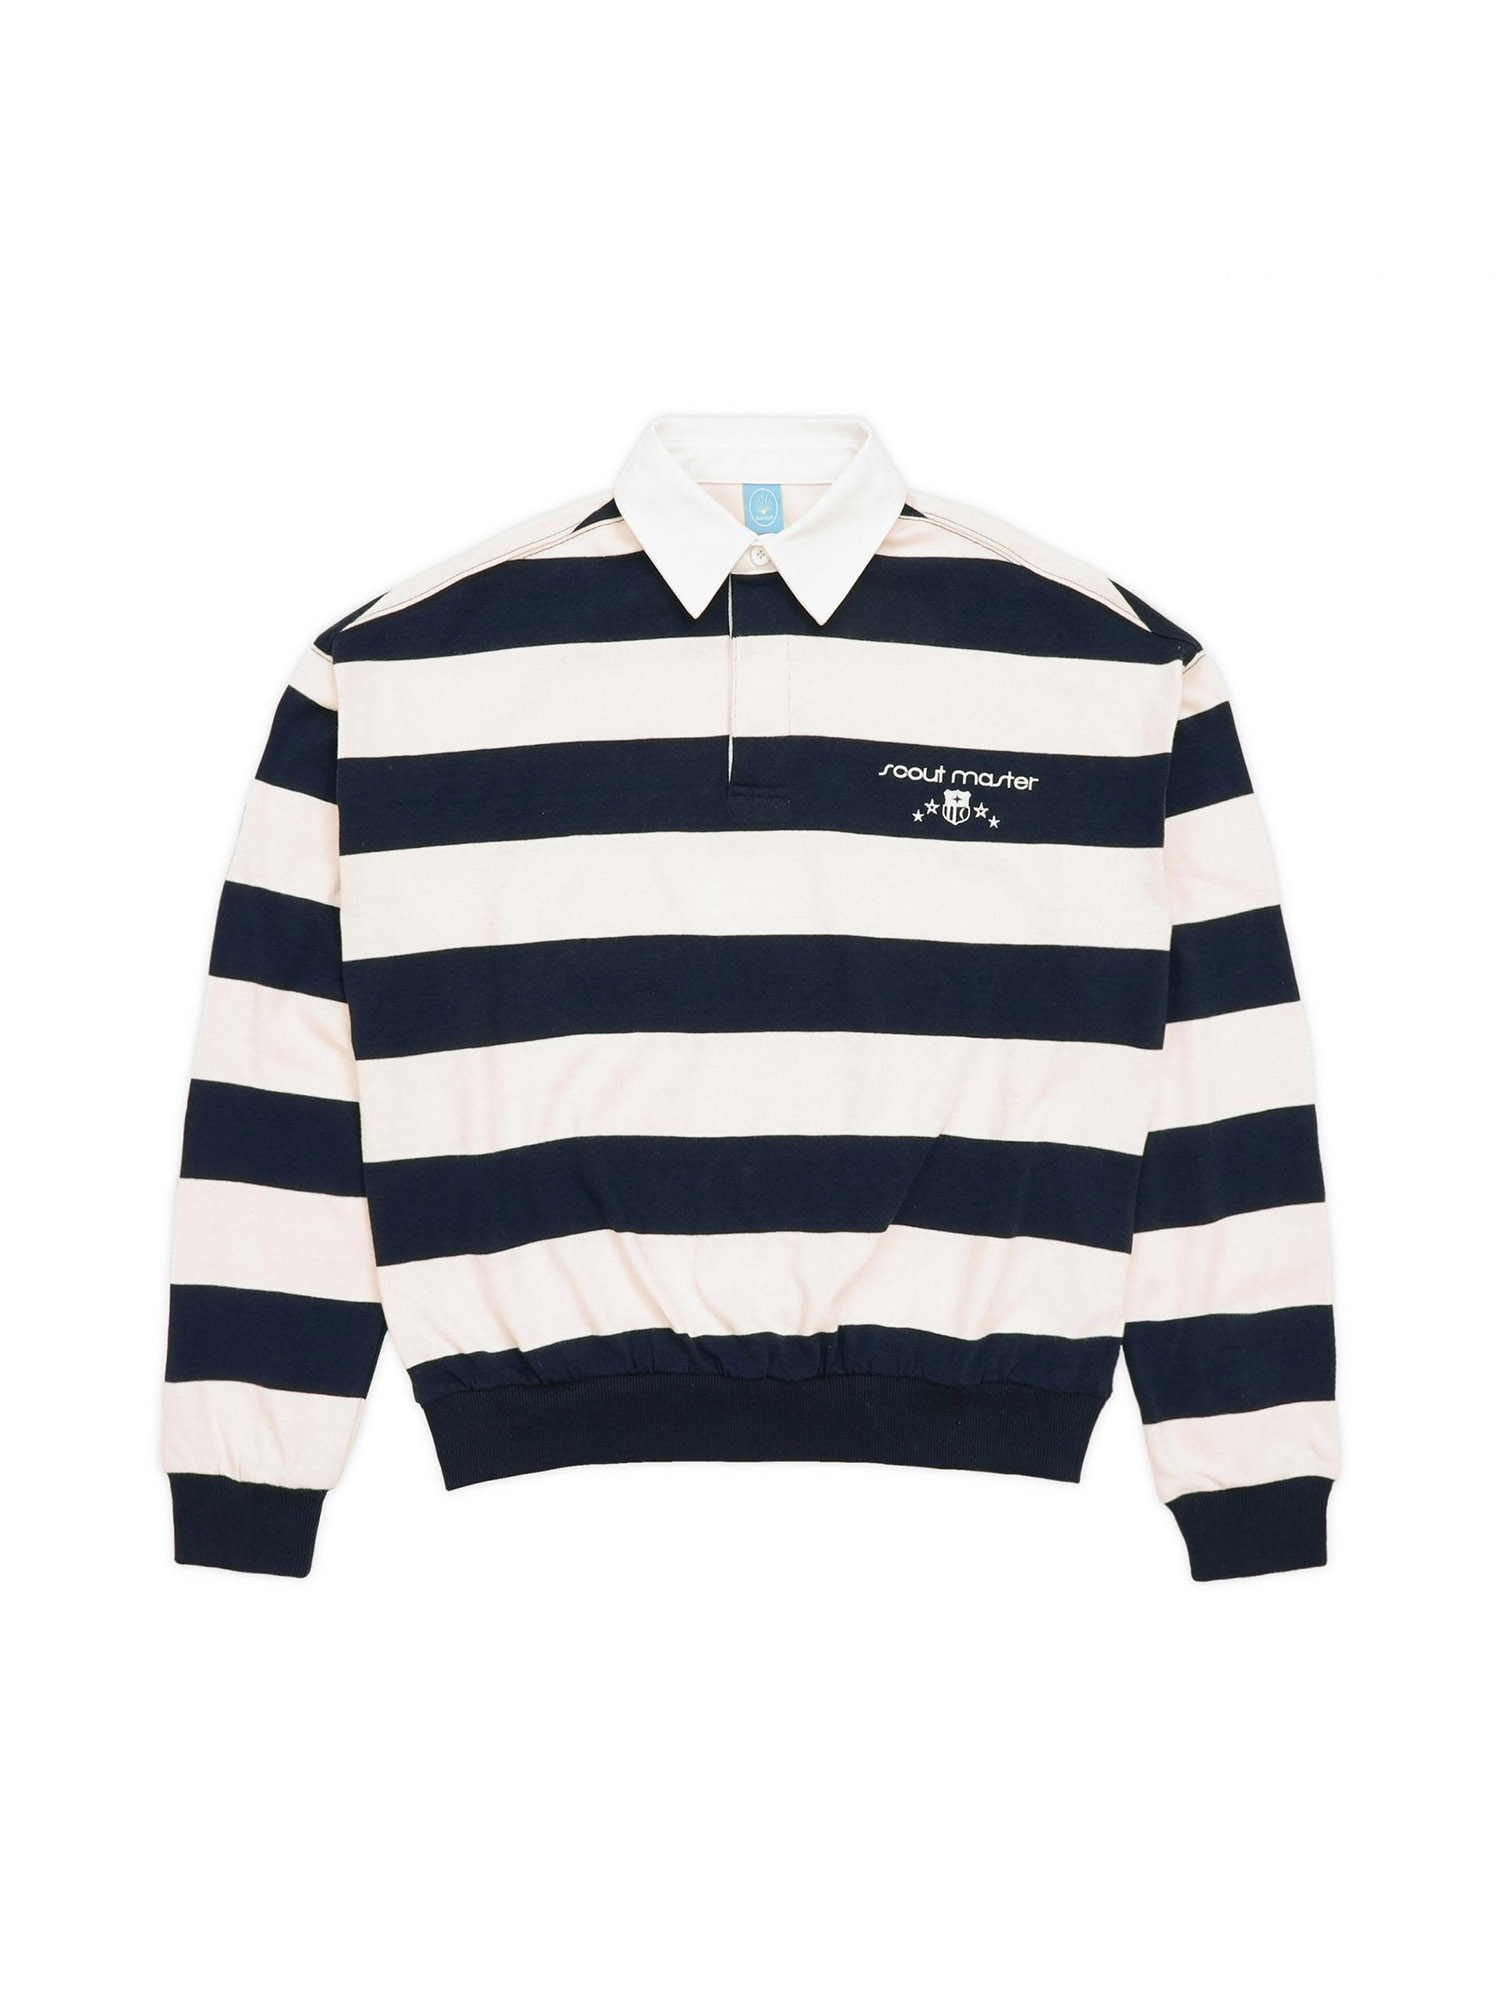 Scout Master Rugby shirt - Ivory Navy